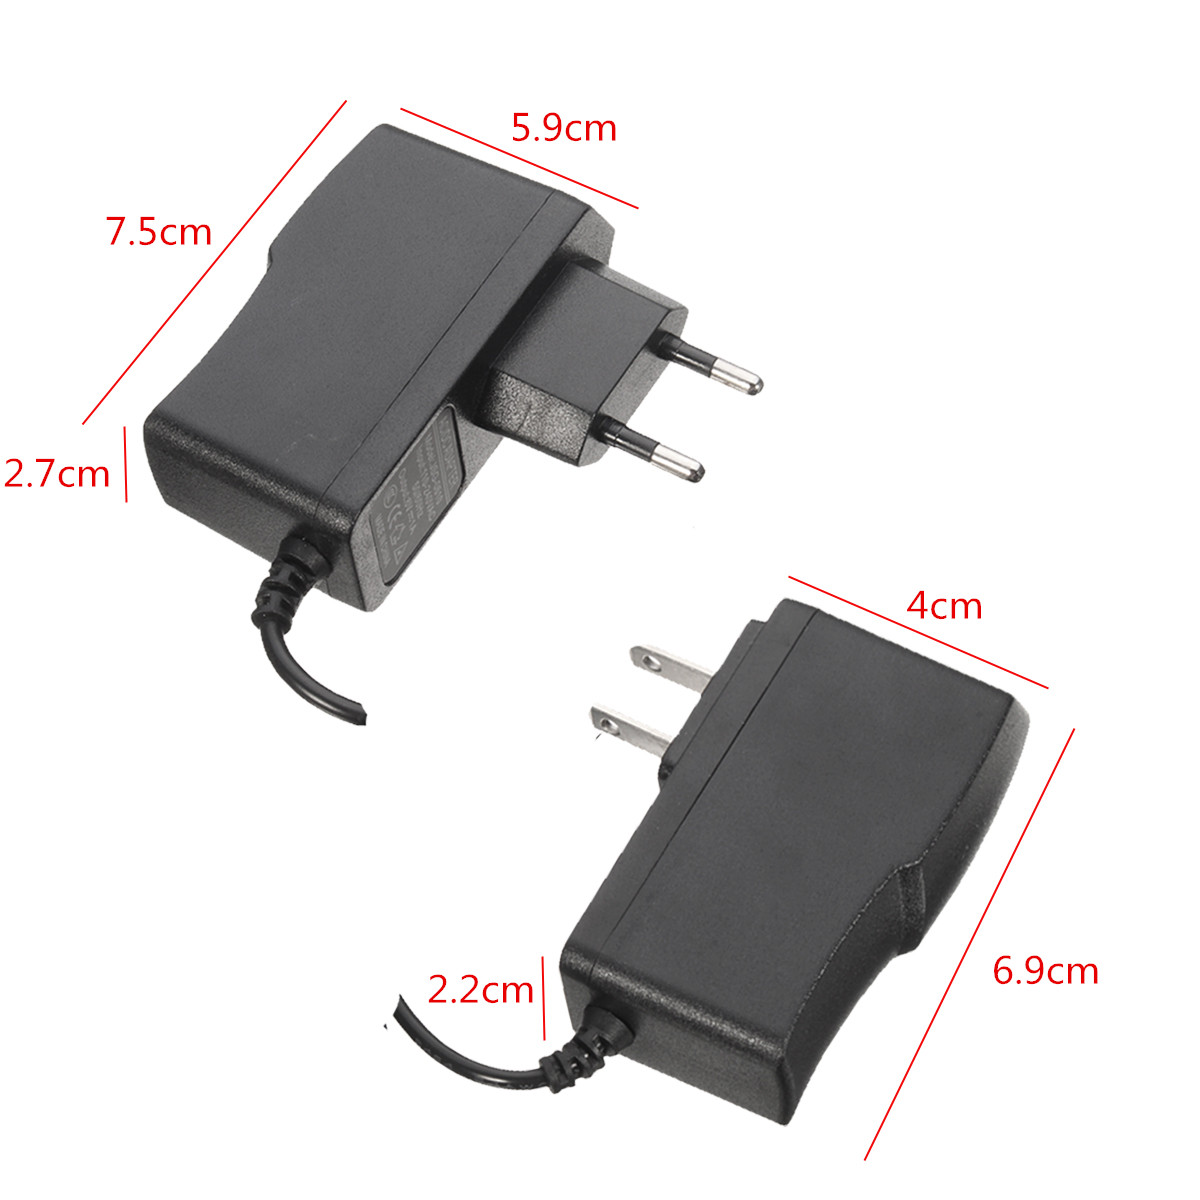 110-240V-USEU-Power-Supply-Charger-Adapter-Charger-For-Electric-Fruit-Potato-Vegetable-Skin-Peeler-1244288-6